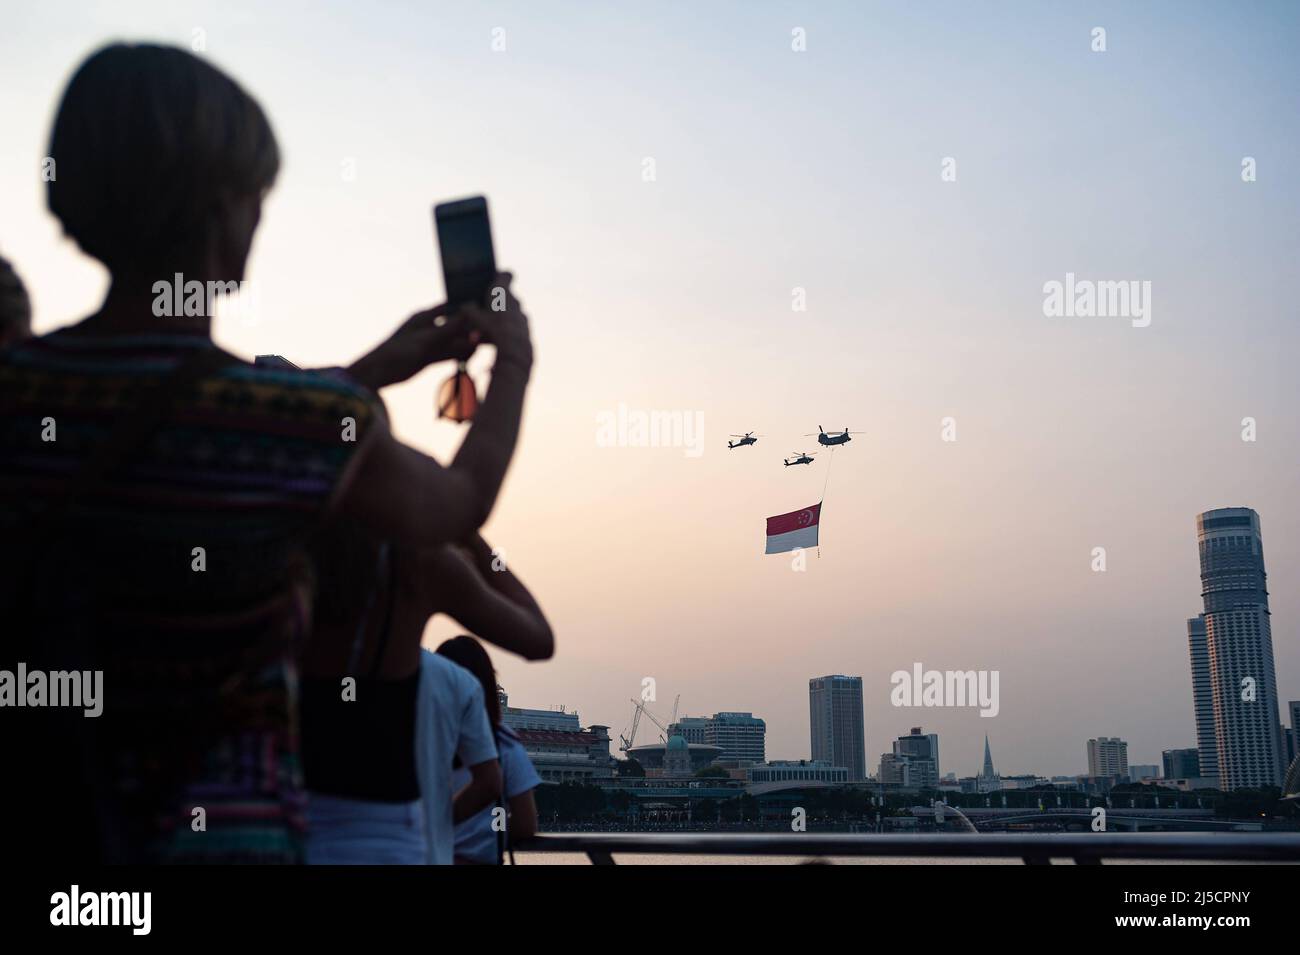 07/21/2018, Singapore, Republic of Singapore, Asia - Onlookers watch Air Force (RSAF) helicopters fly a giant state flag over skyscrapers in Marina Bay during a training flight in preparation for the upcoming National Day holiday on Aug. 9. [automated translation] Stock Photo